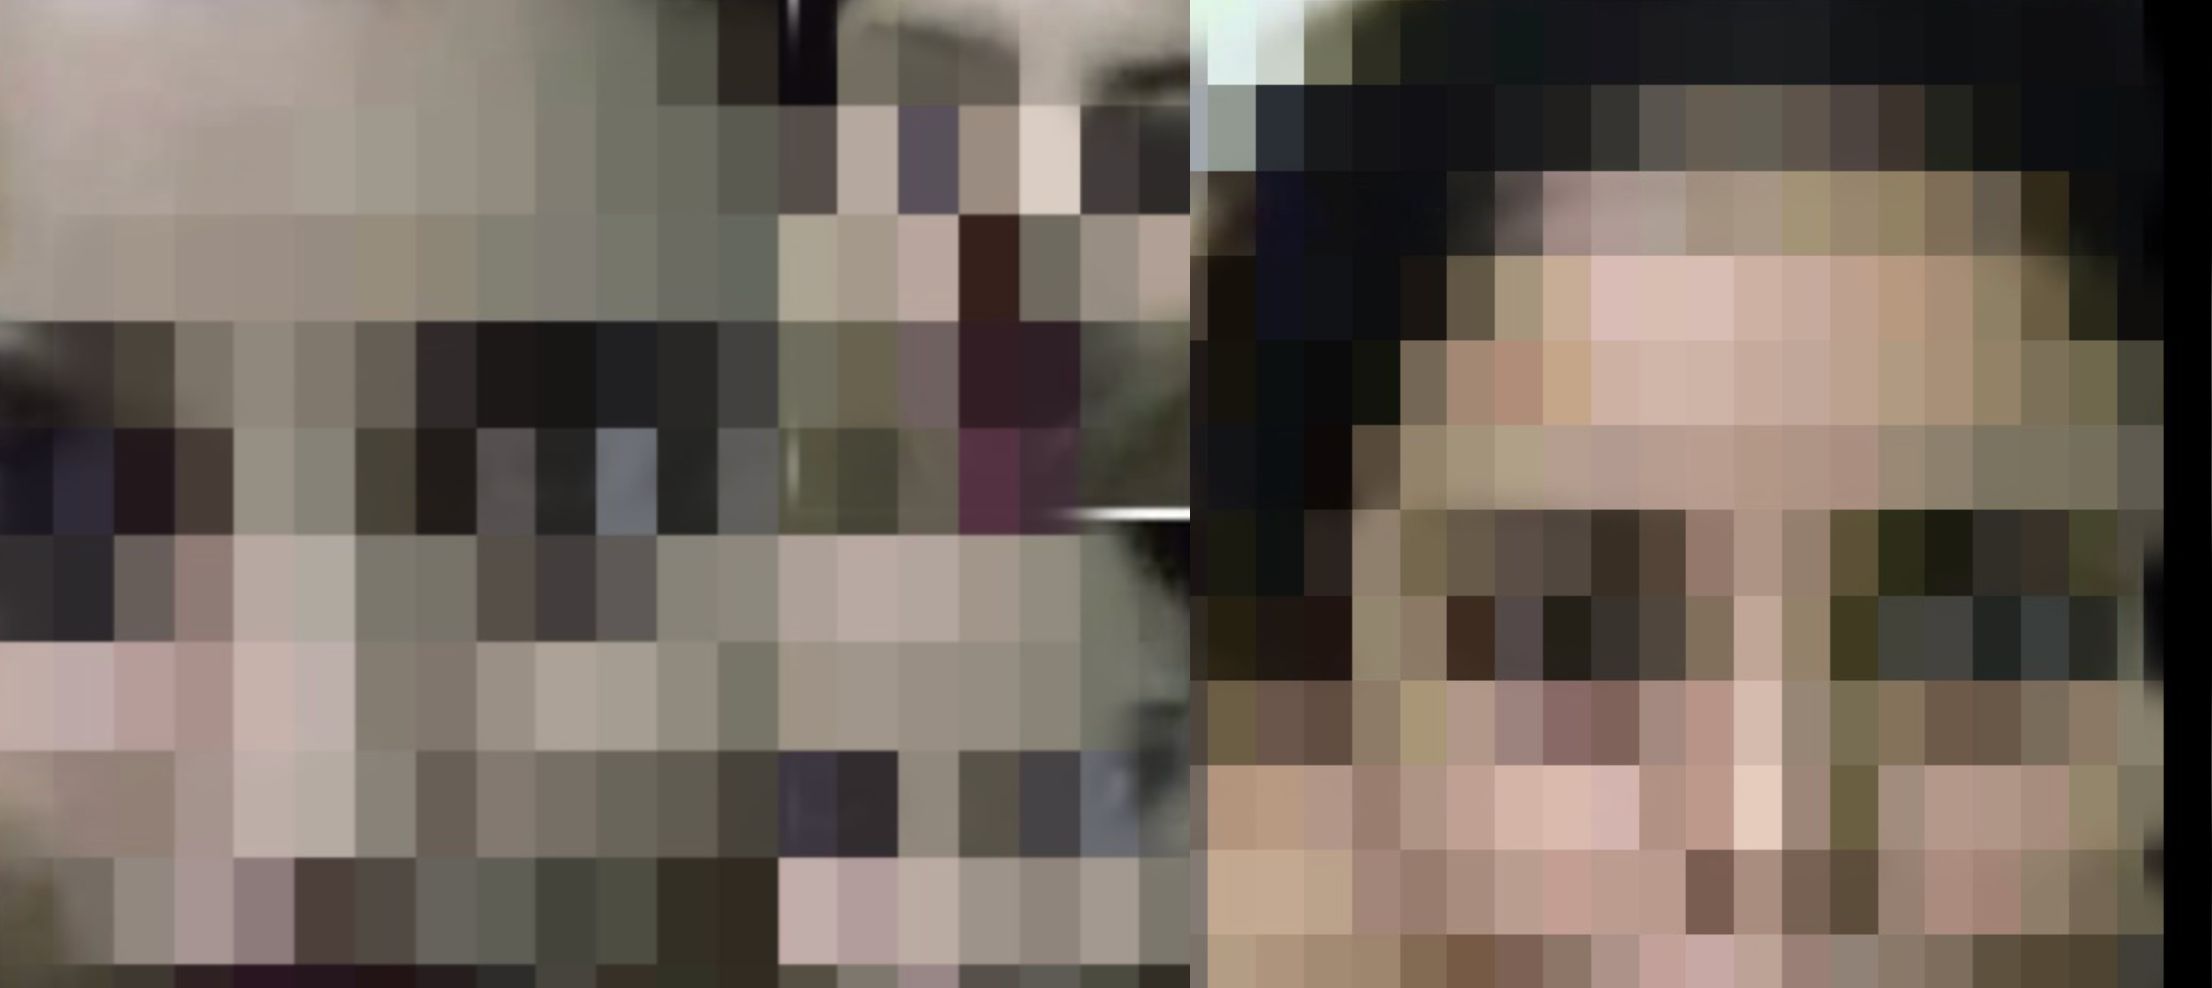 Best of Why is asian porn blurred out